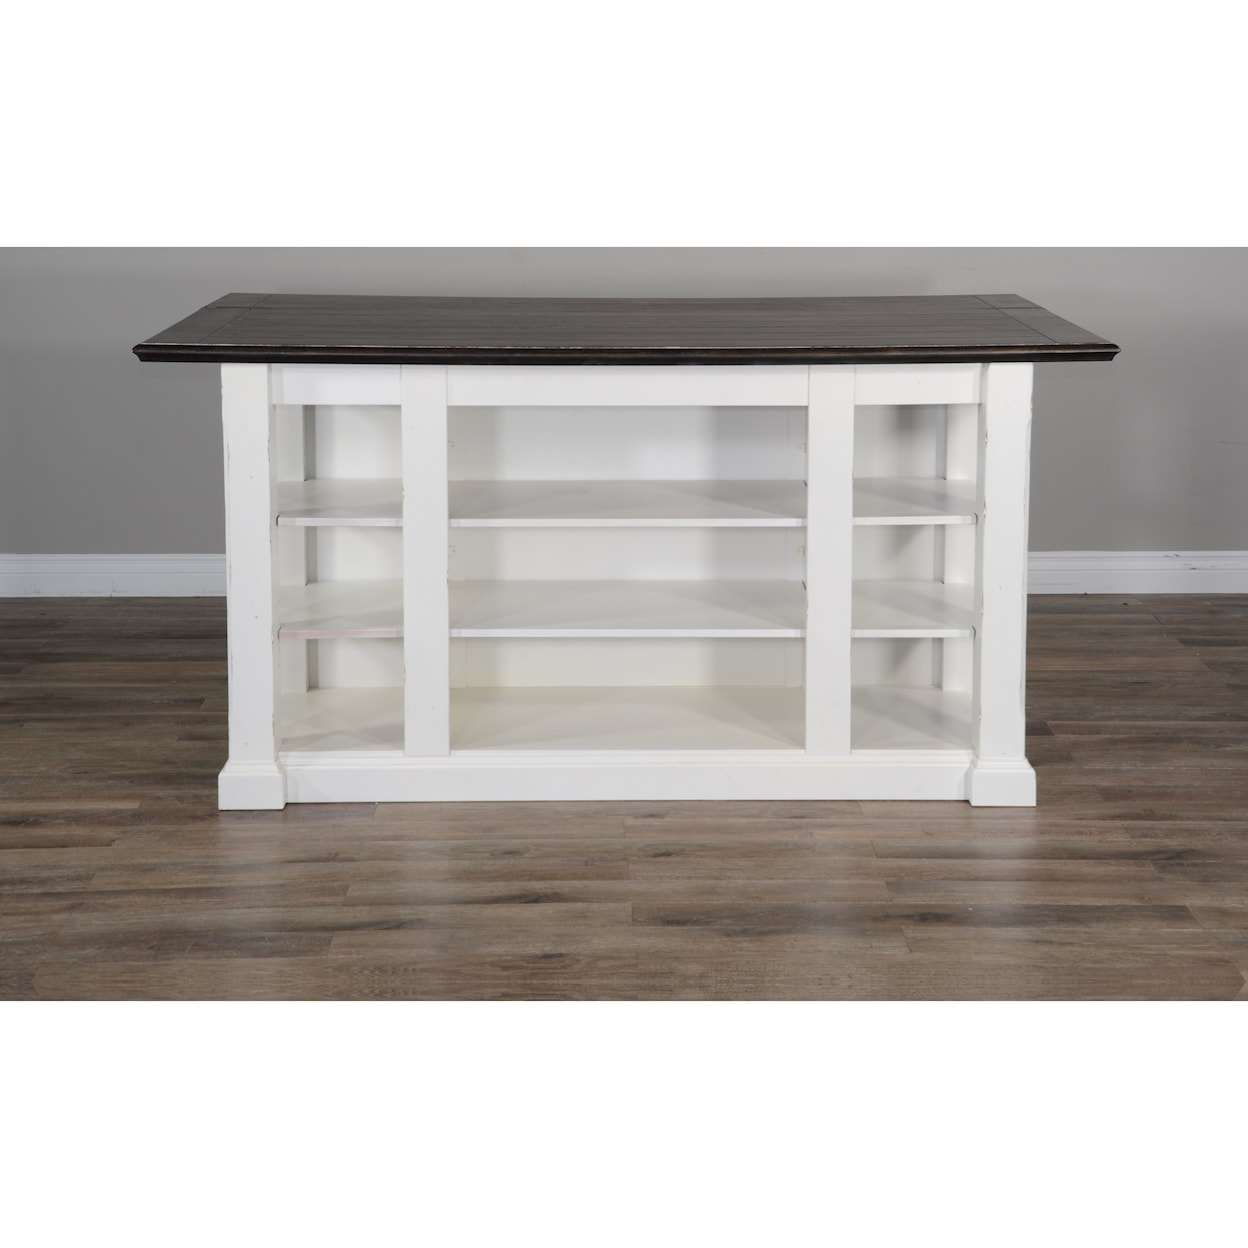 Sunny Designs Carriage House Kitchen Island